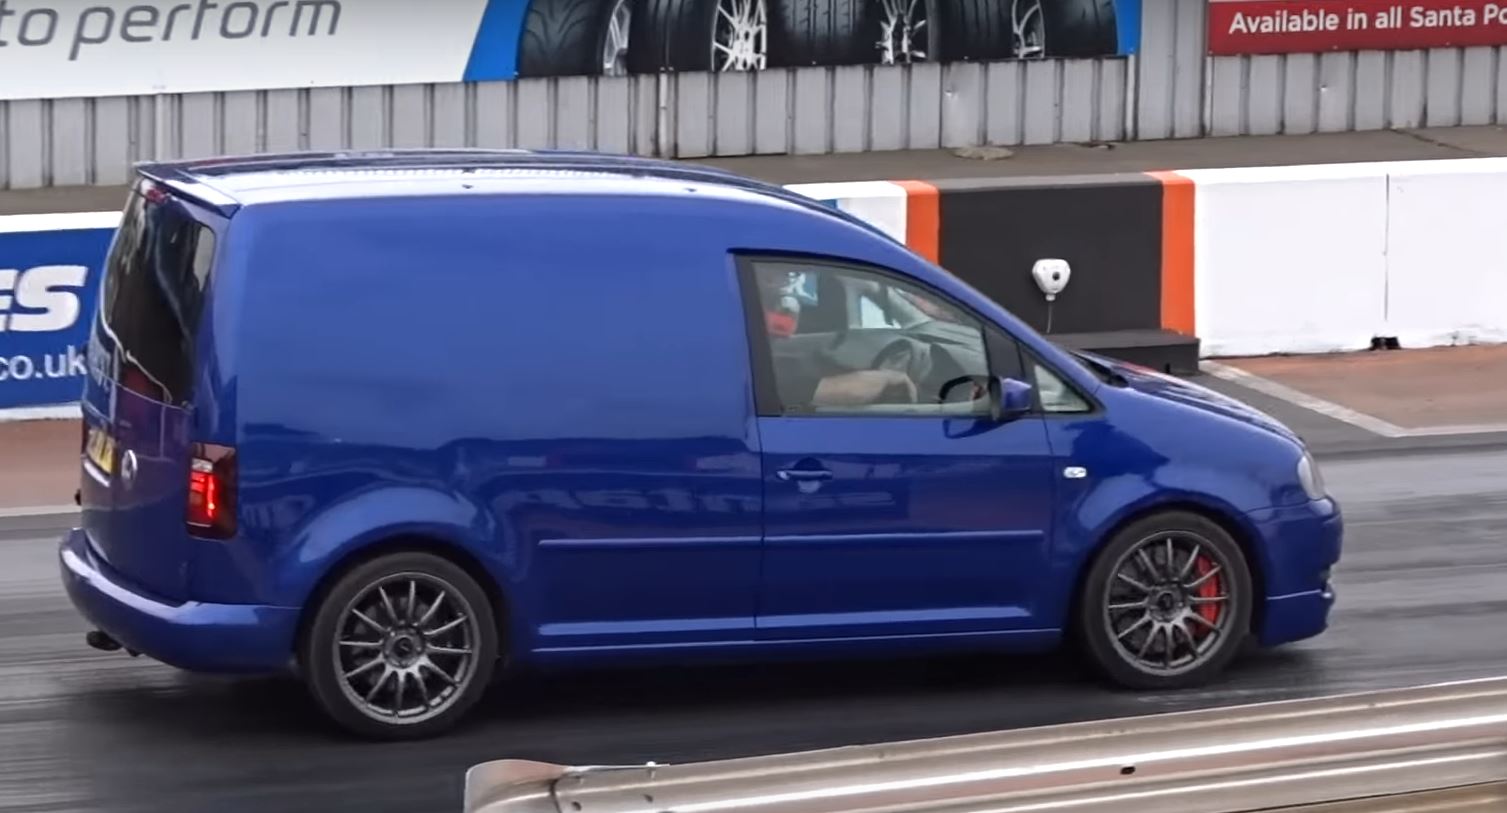 https://s1.cdn.autoevolution.com/images/news/500-hp-vw-caddy-r-has-golf-7-r-engine-and-revo-stage-3-tune-120568_1.jpg